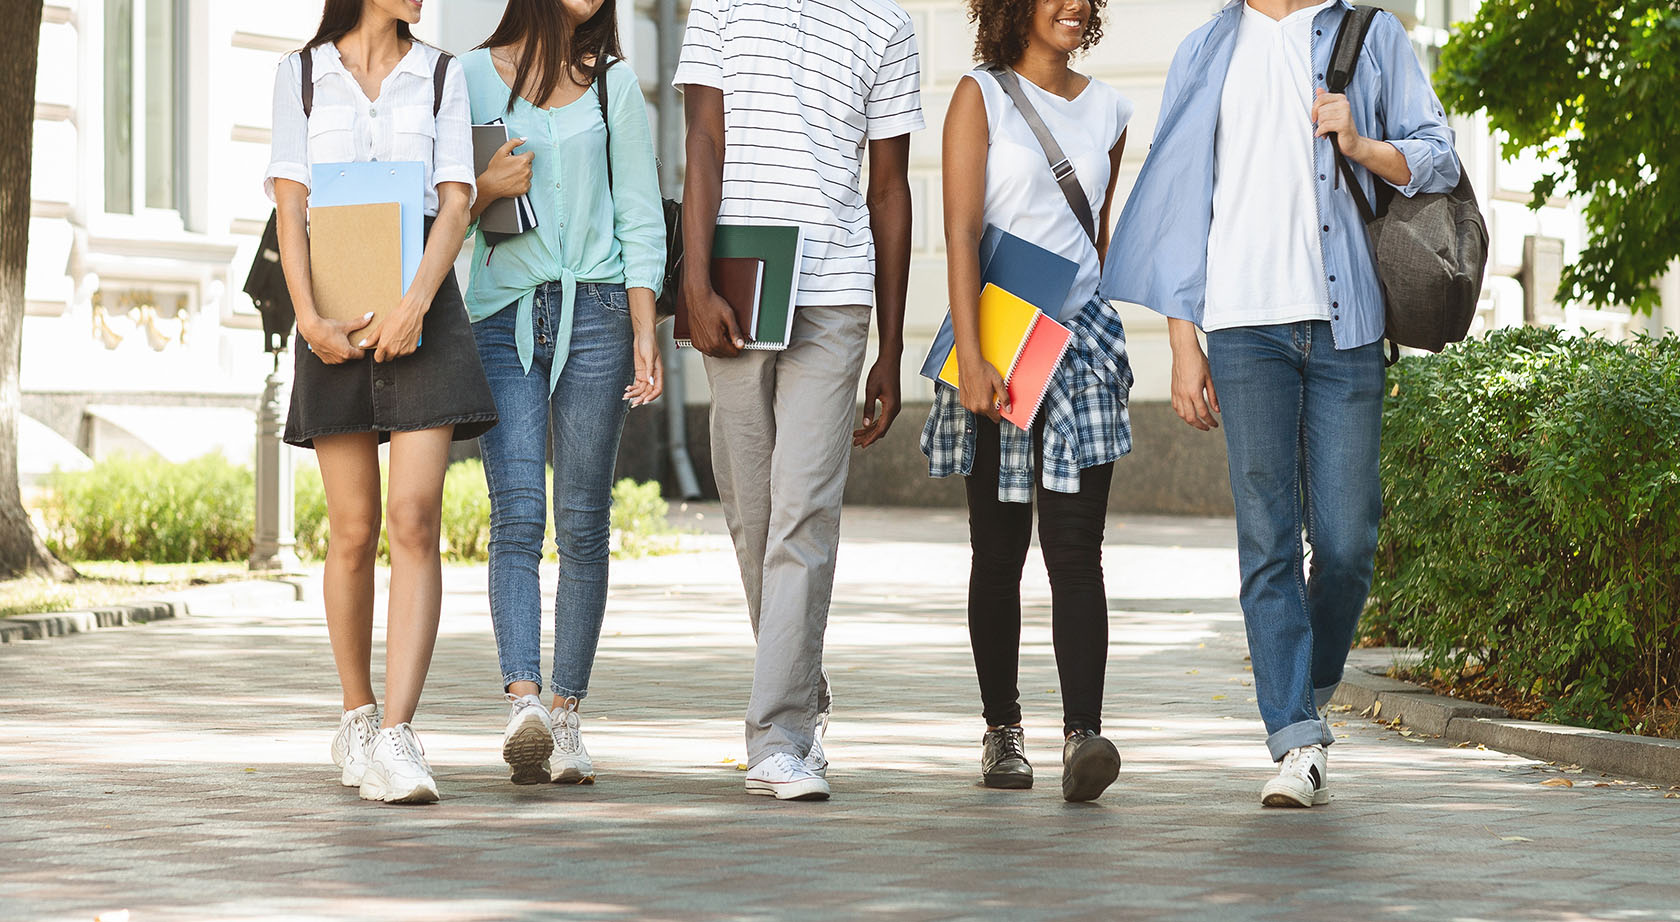 A group of students walking on a sidewalk